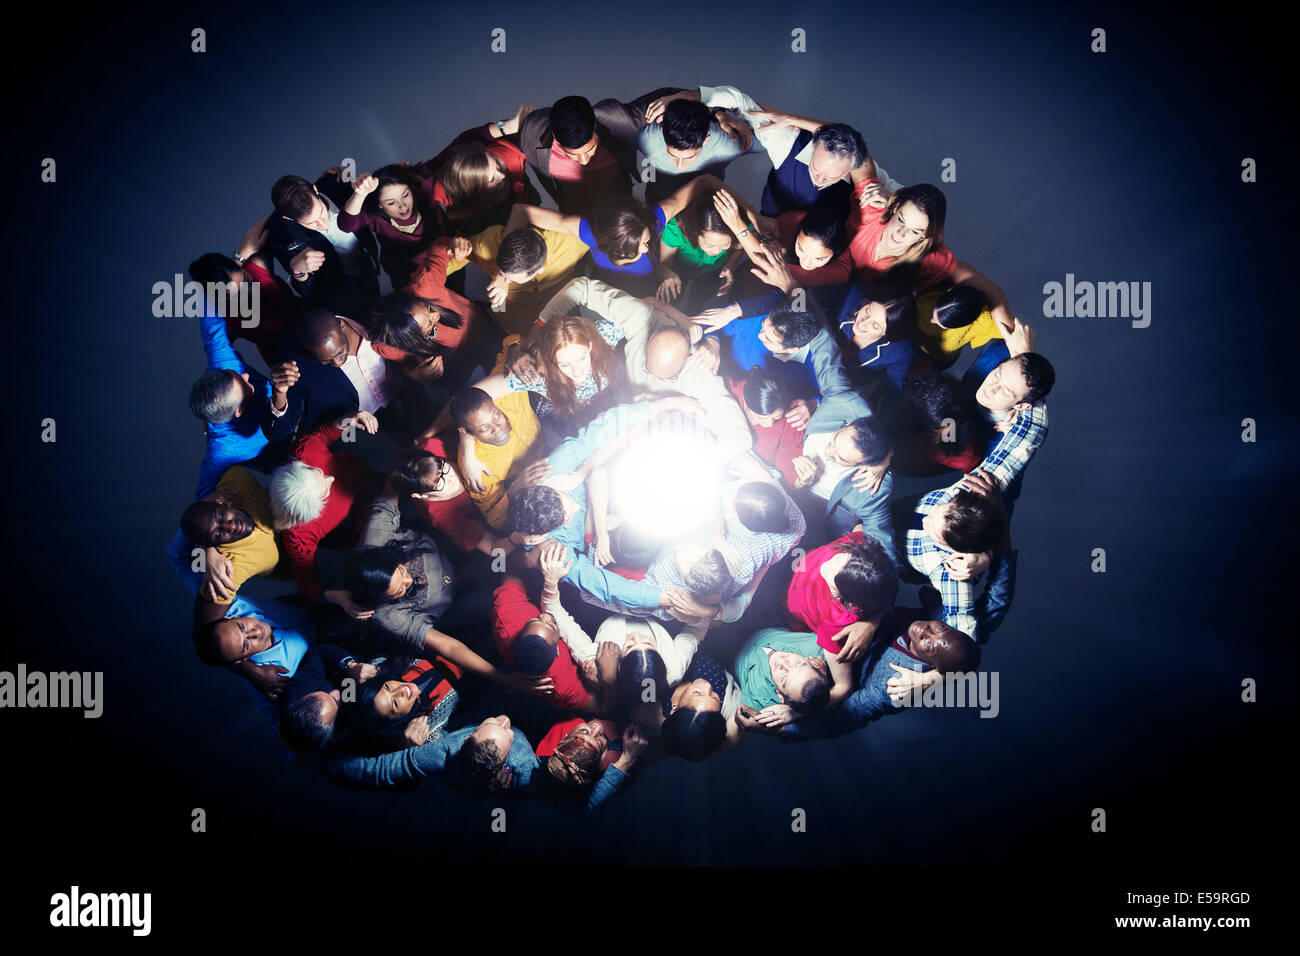 Diverse group in huddle around light Stock Photo